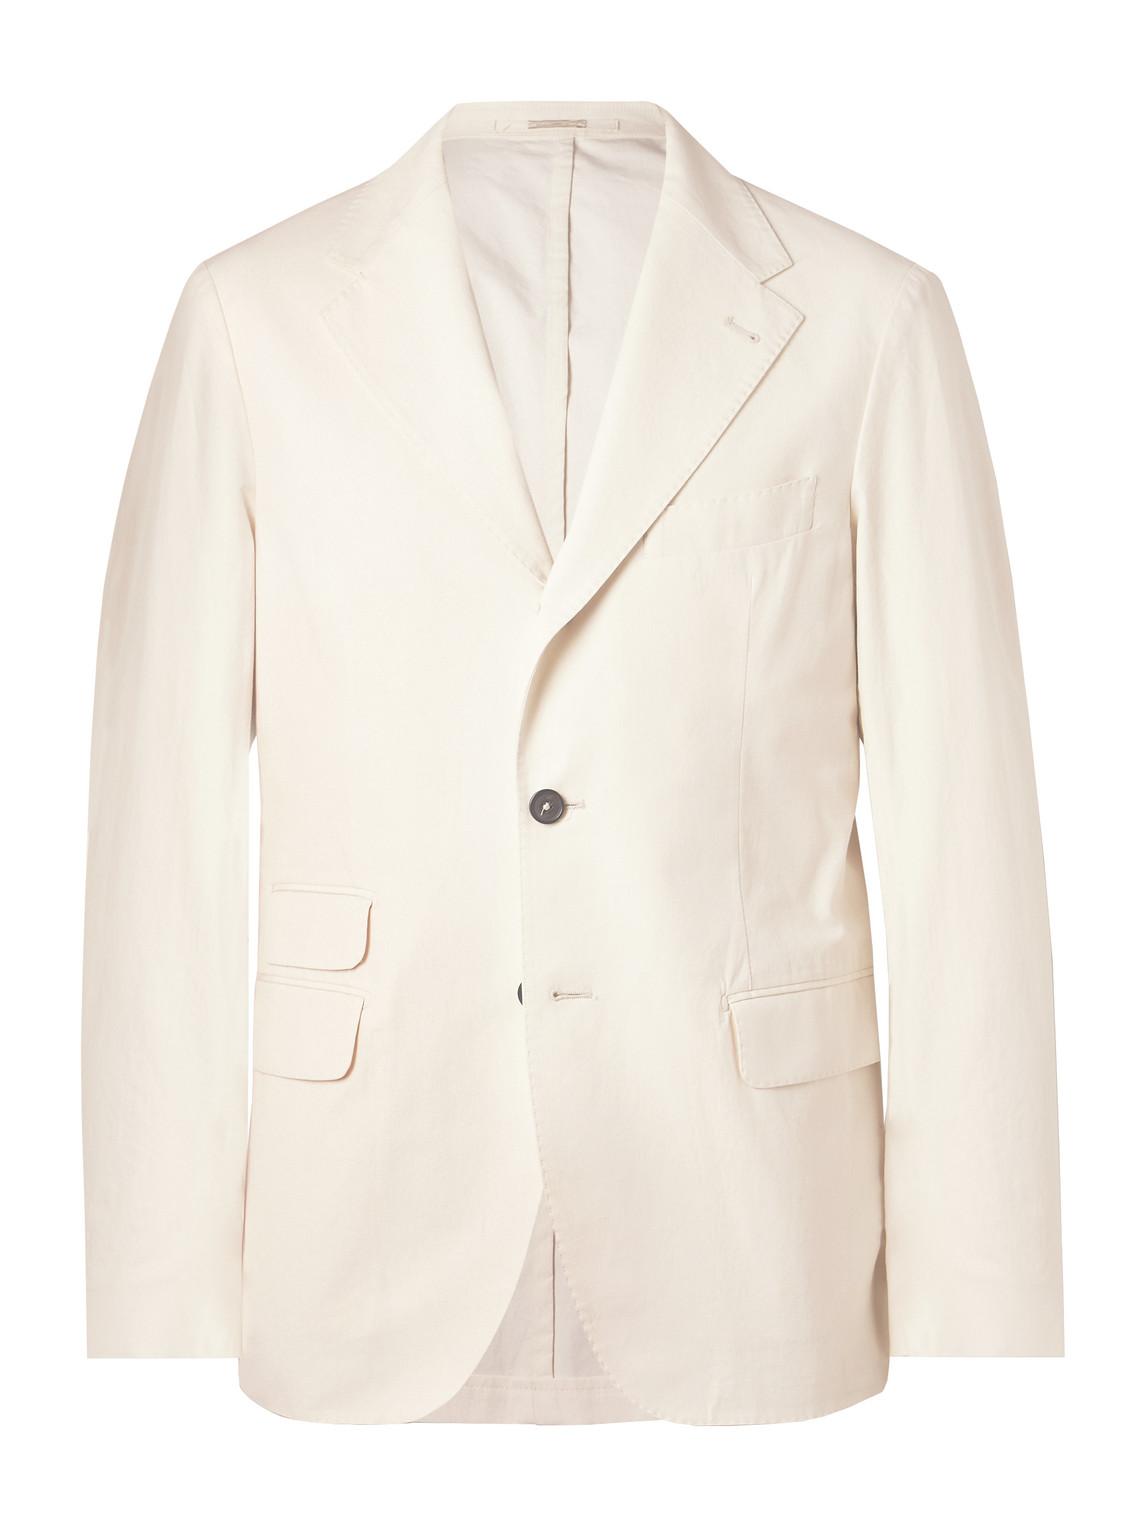 Massimo Alba Sloop Cotton Suit in Natural for Men | Lyst